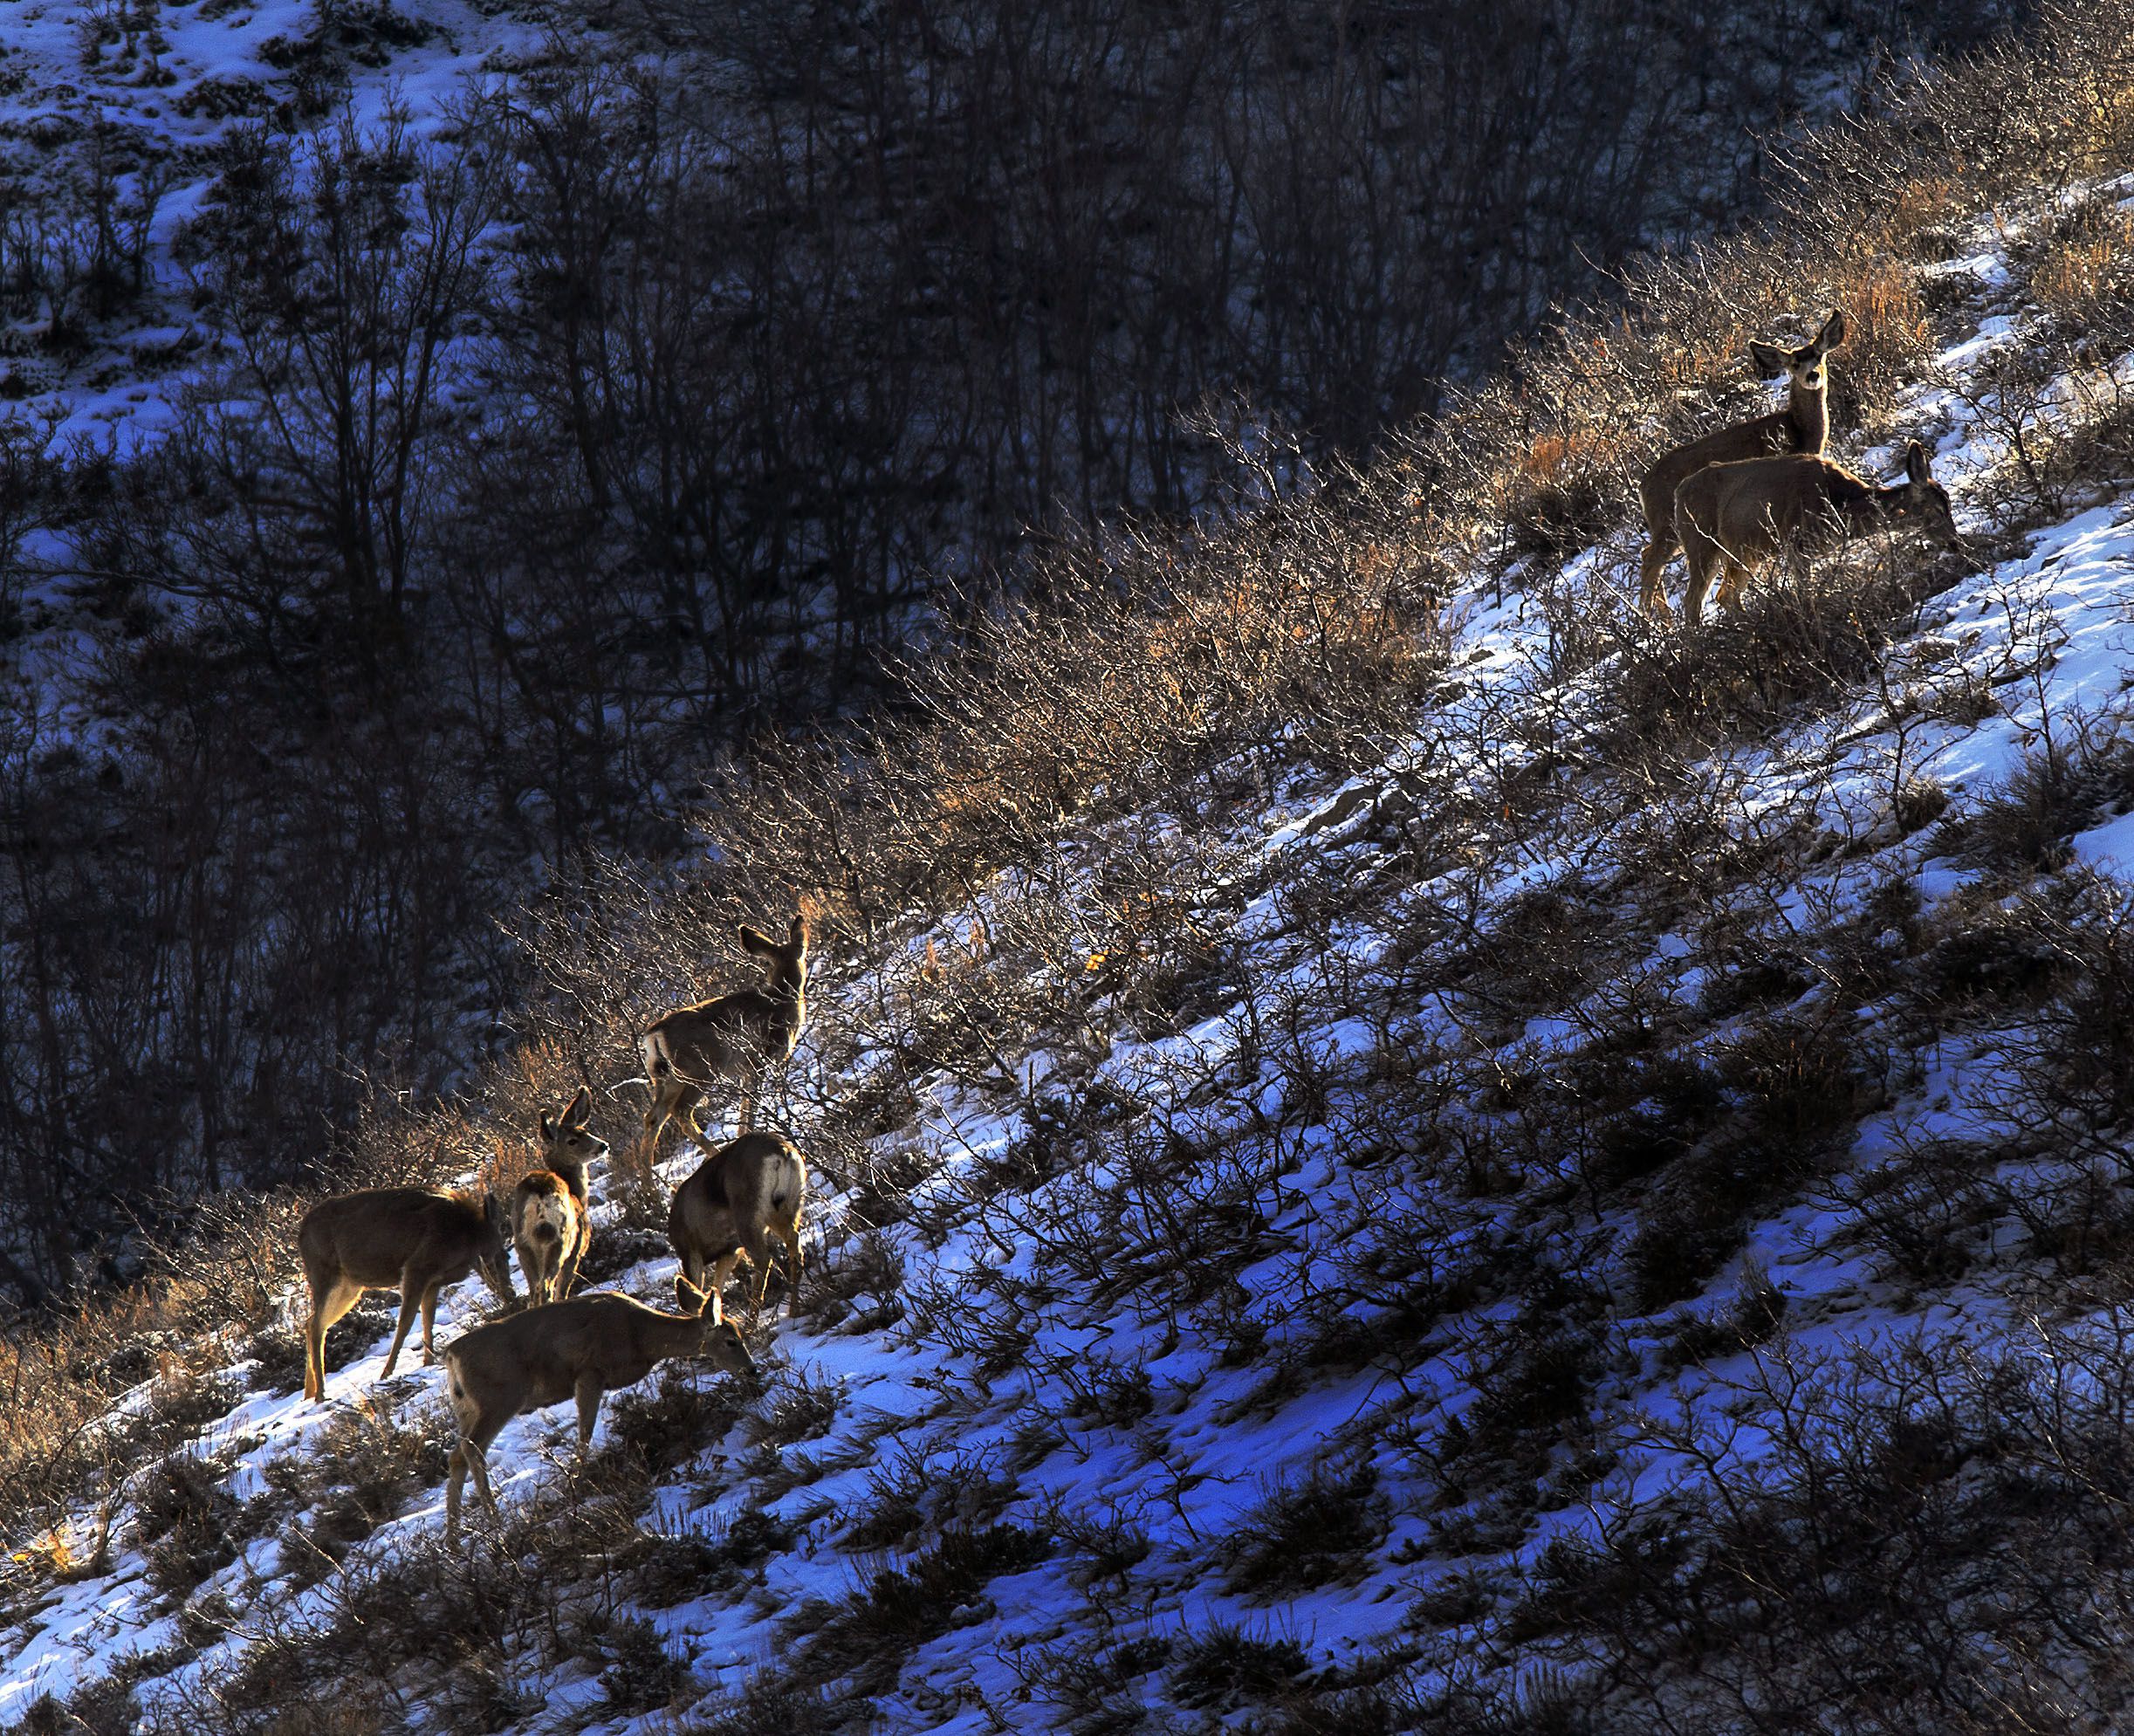 Baiting big game is legal in Utah — for now. But is it right?